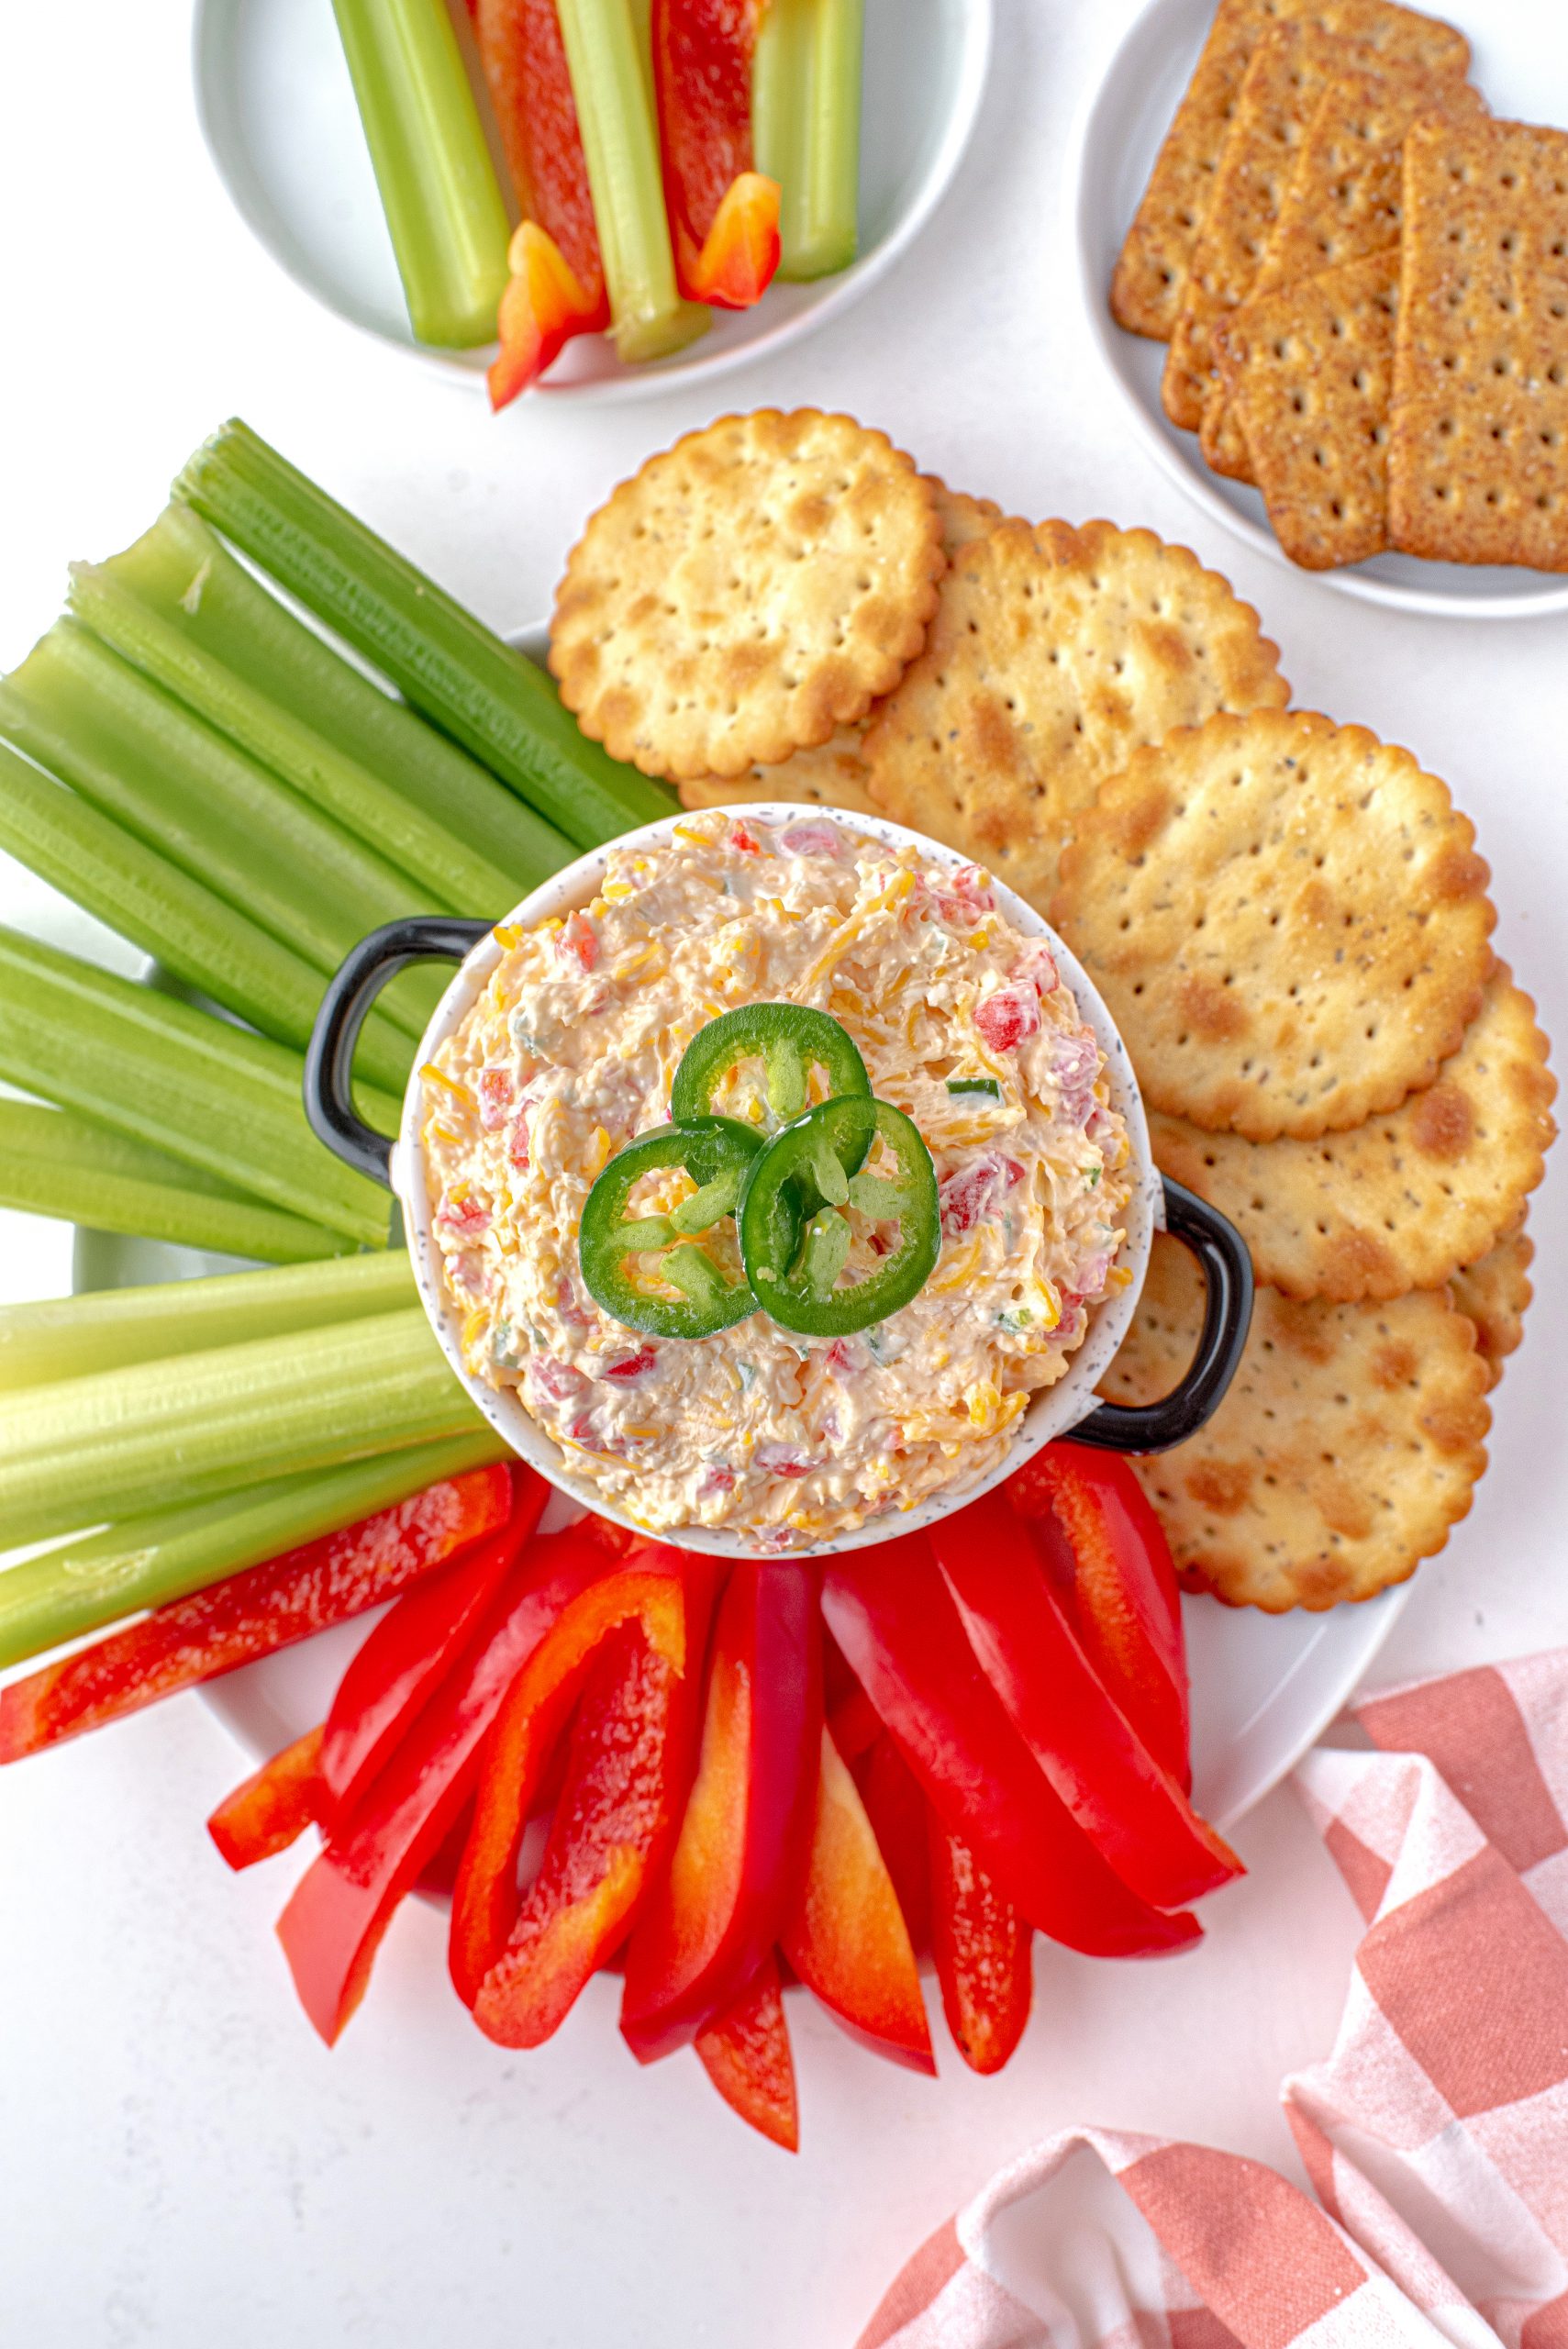 Jalapeno Pimento Cheese Dip with crackers and vegetables.